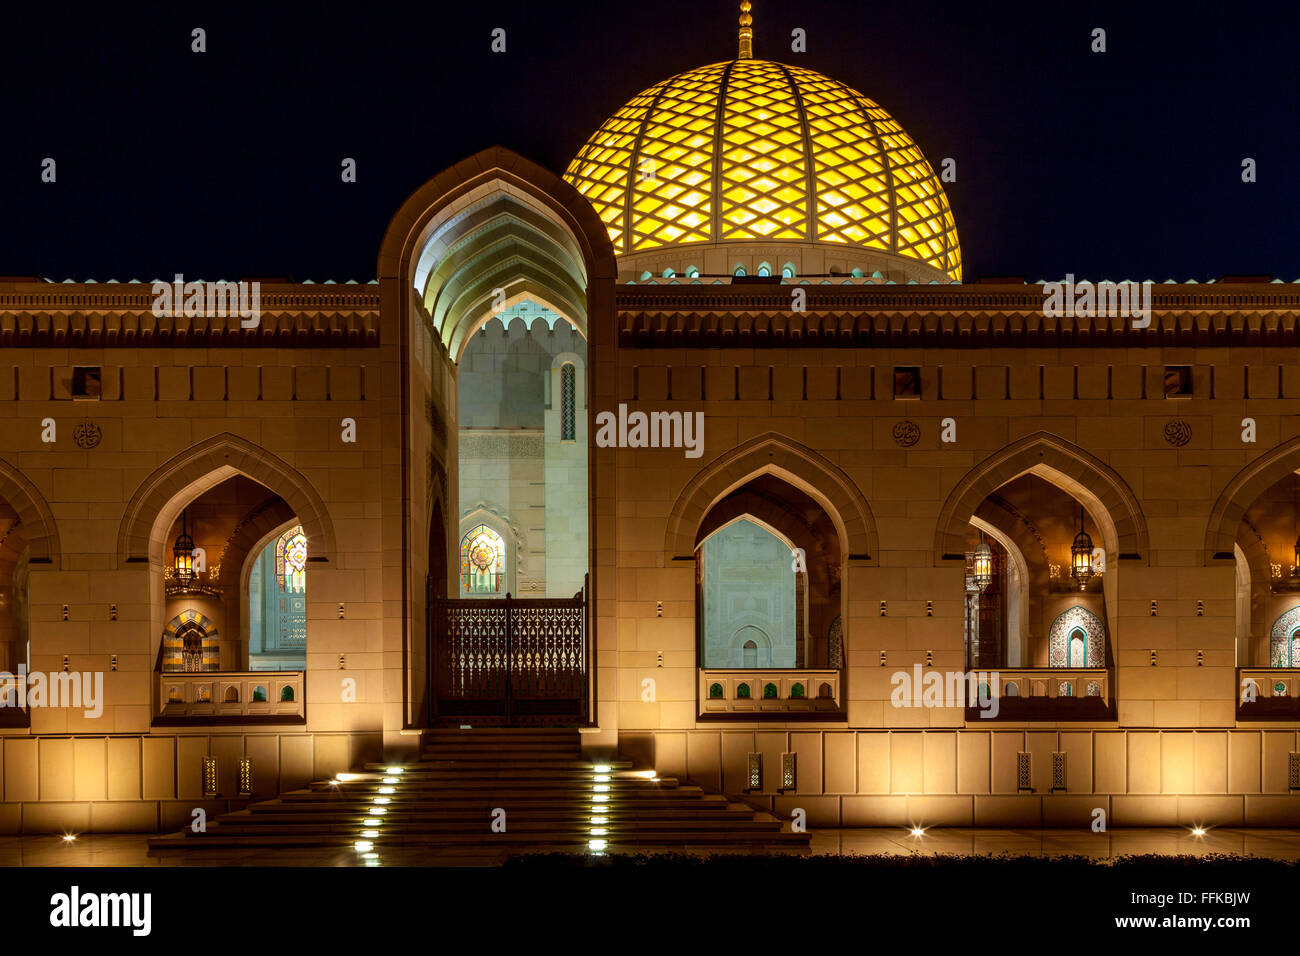 Sultan Qaboos Grand Mosque, Muscat, Sultanate Of Oman Stock Photo